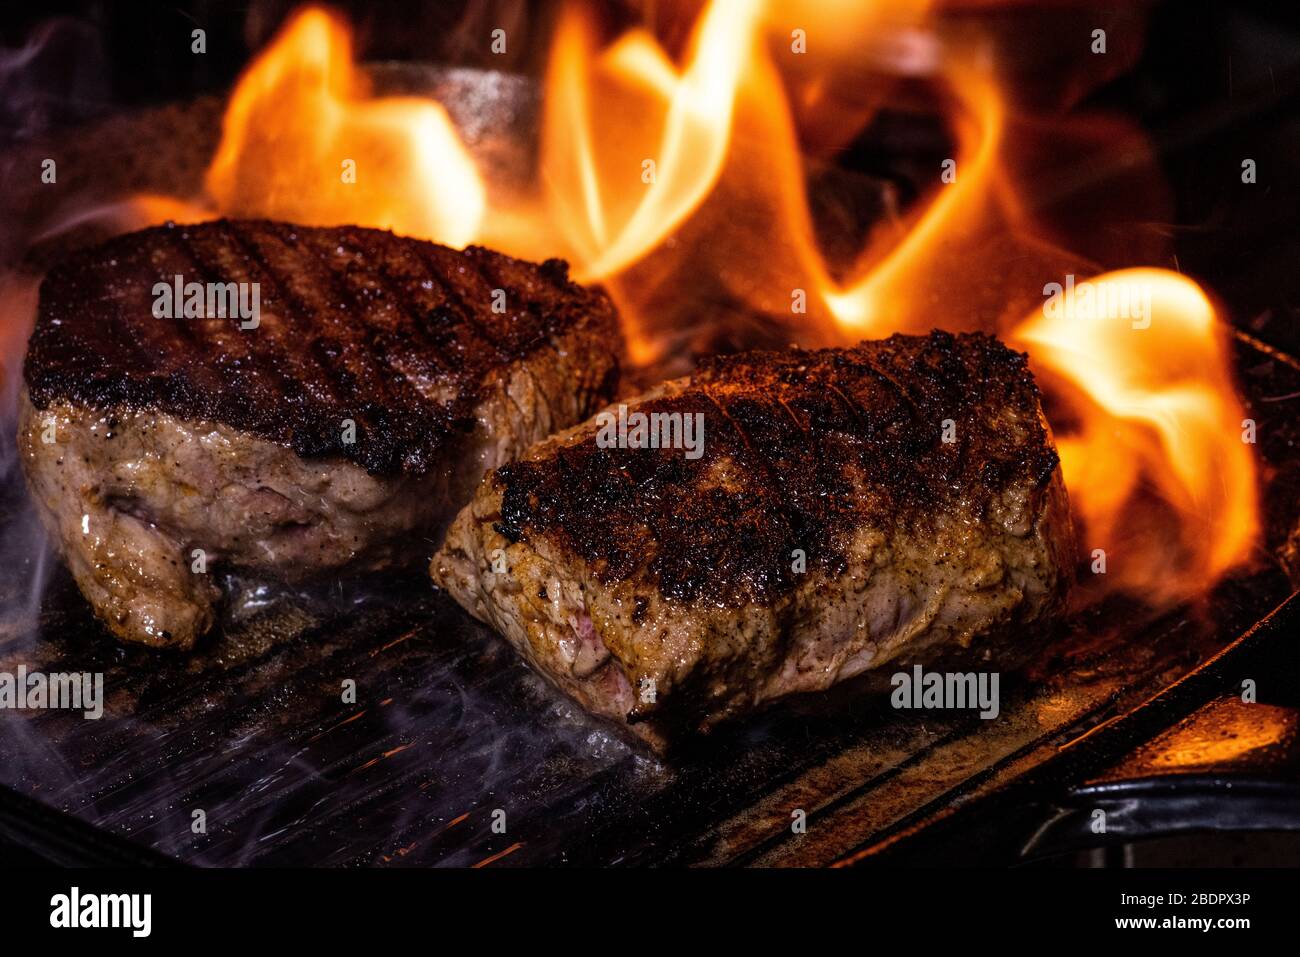 steak on a cast iron griddle Stock Photo